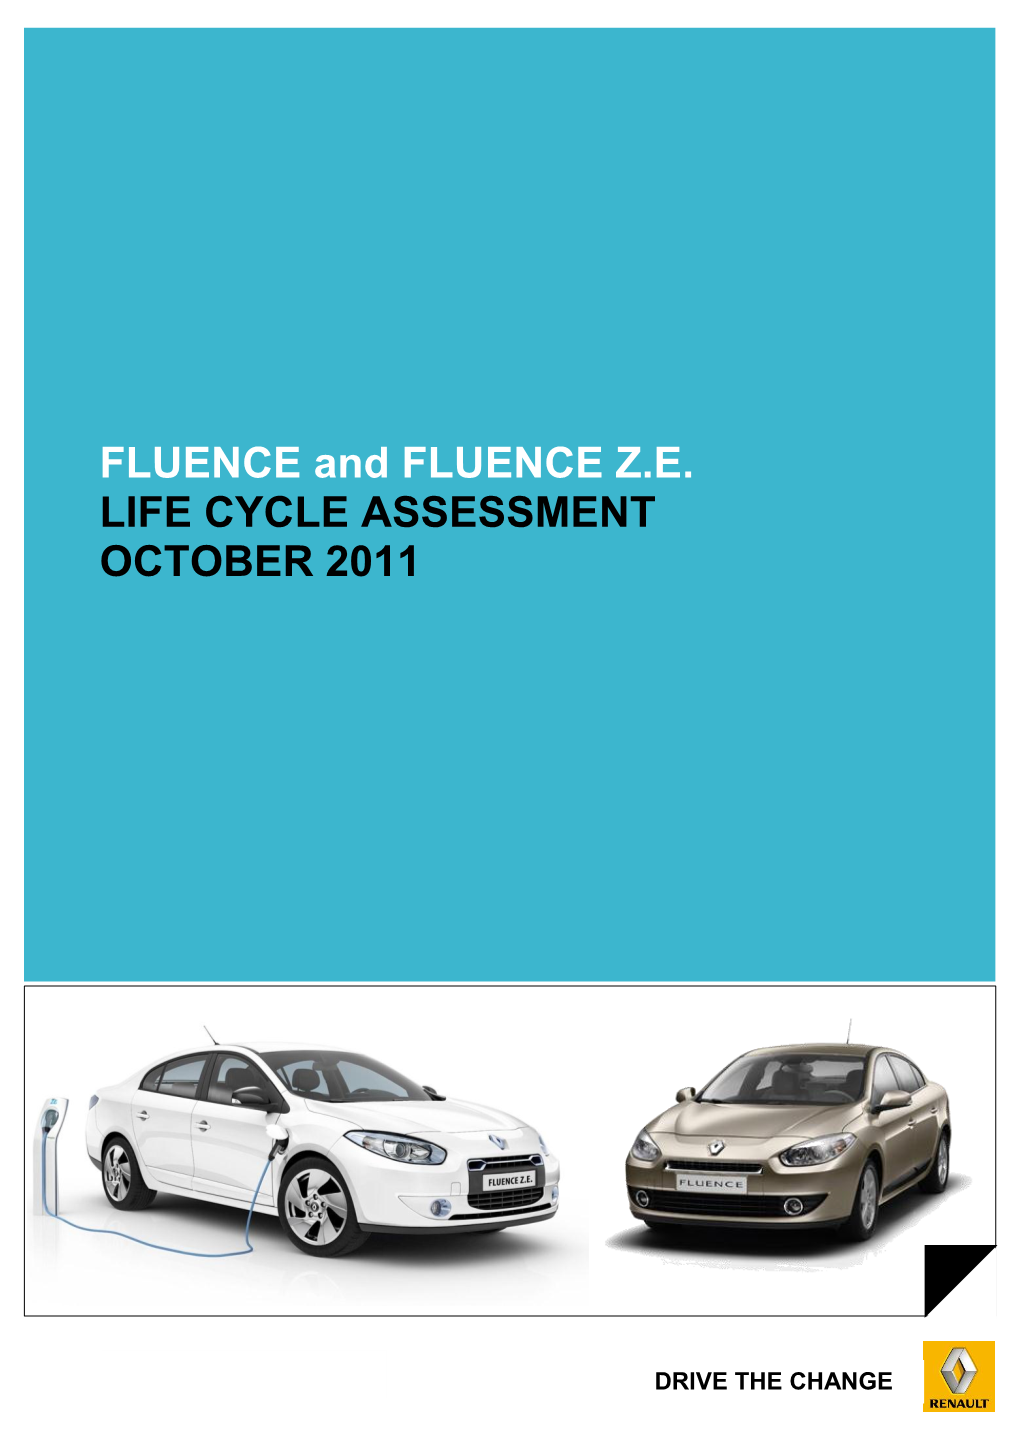 Fluence and Fluence ZE: Life Cycle Assessment